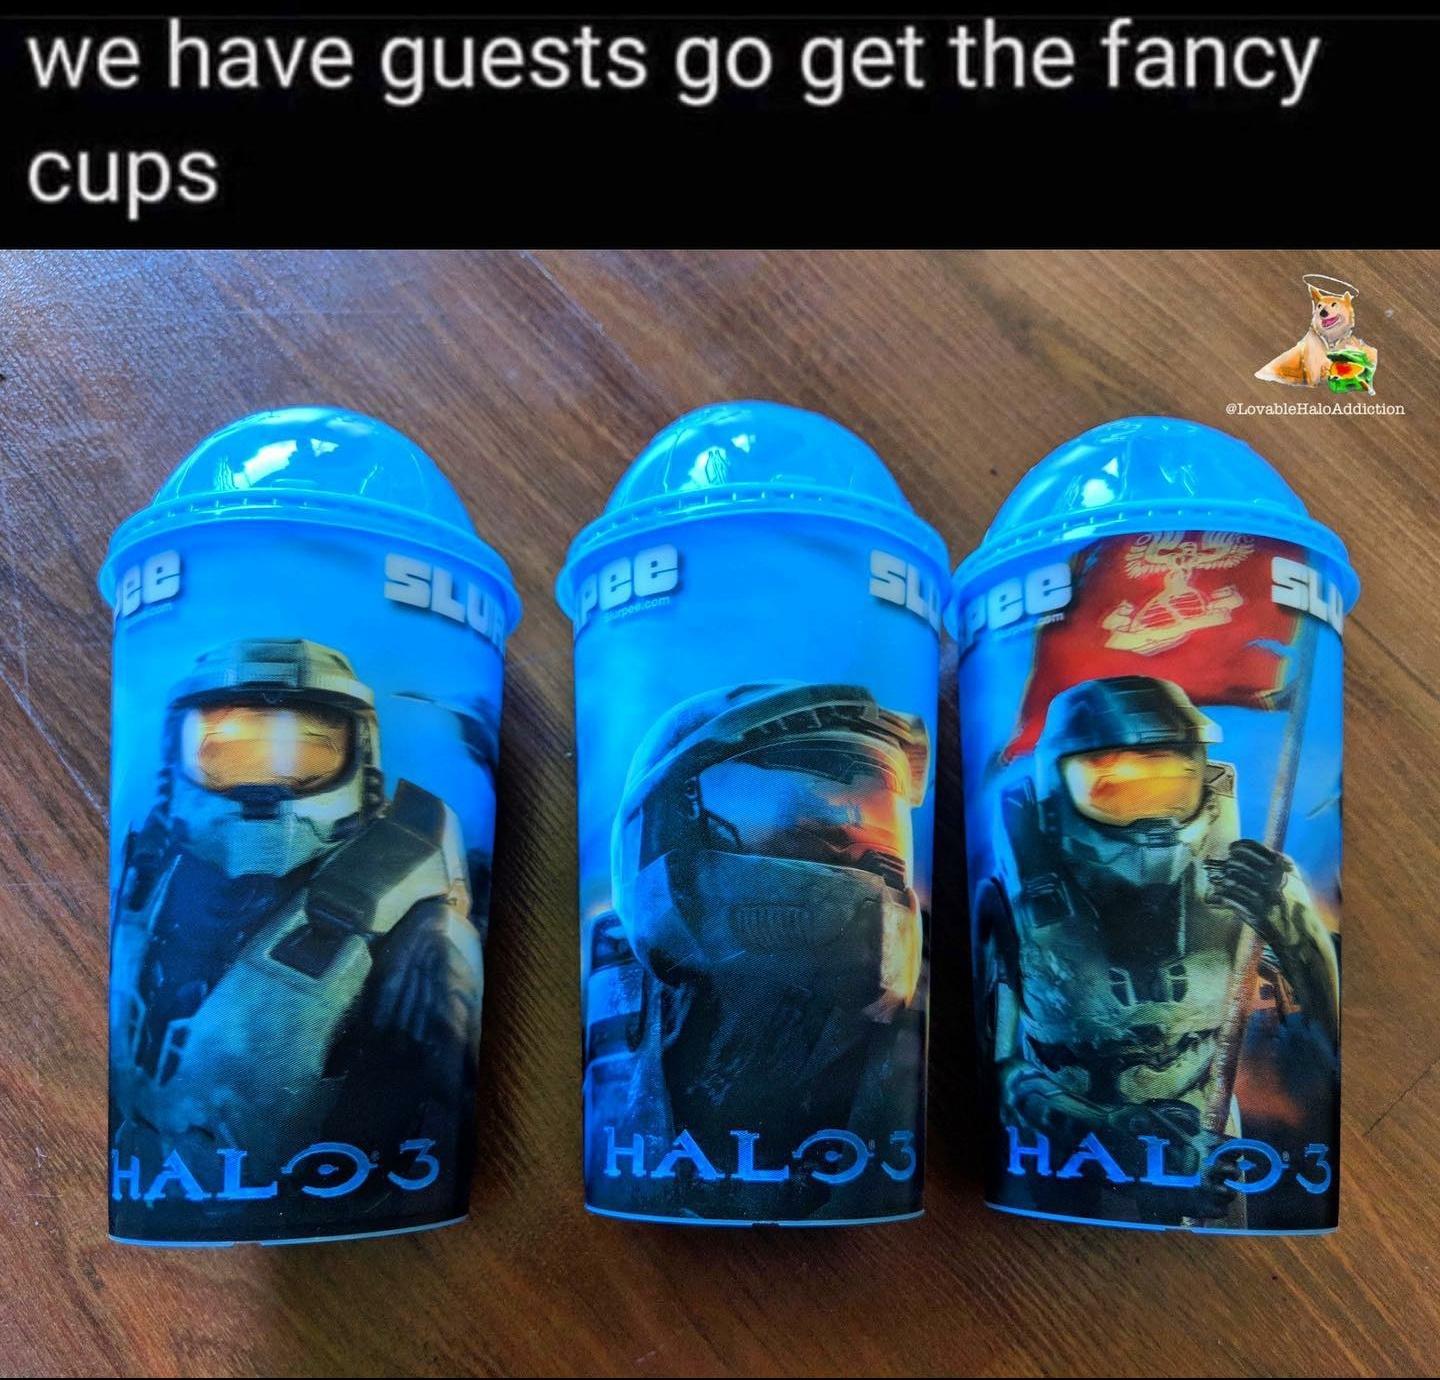 funny gaming memes - cobalt blue - we have guests go get the fancy cups Be ee surpes.com Halo 3 Halo 3 Hads 3